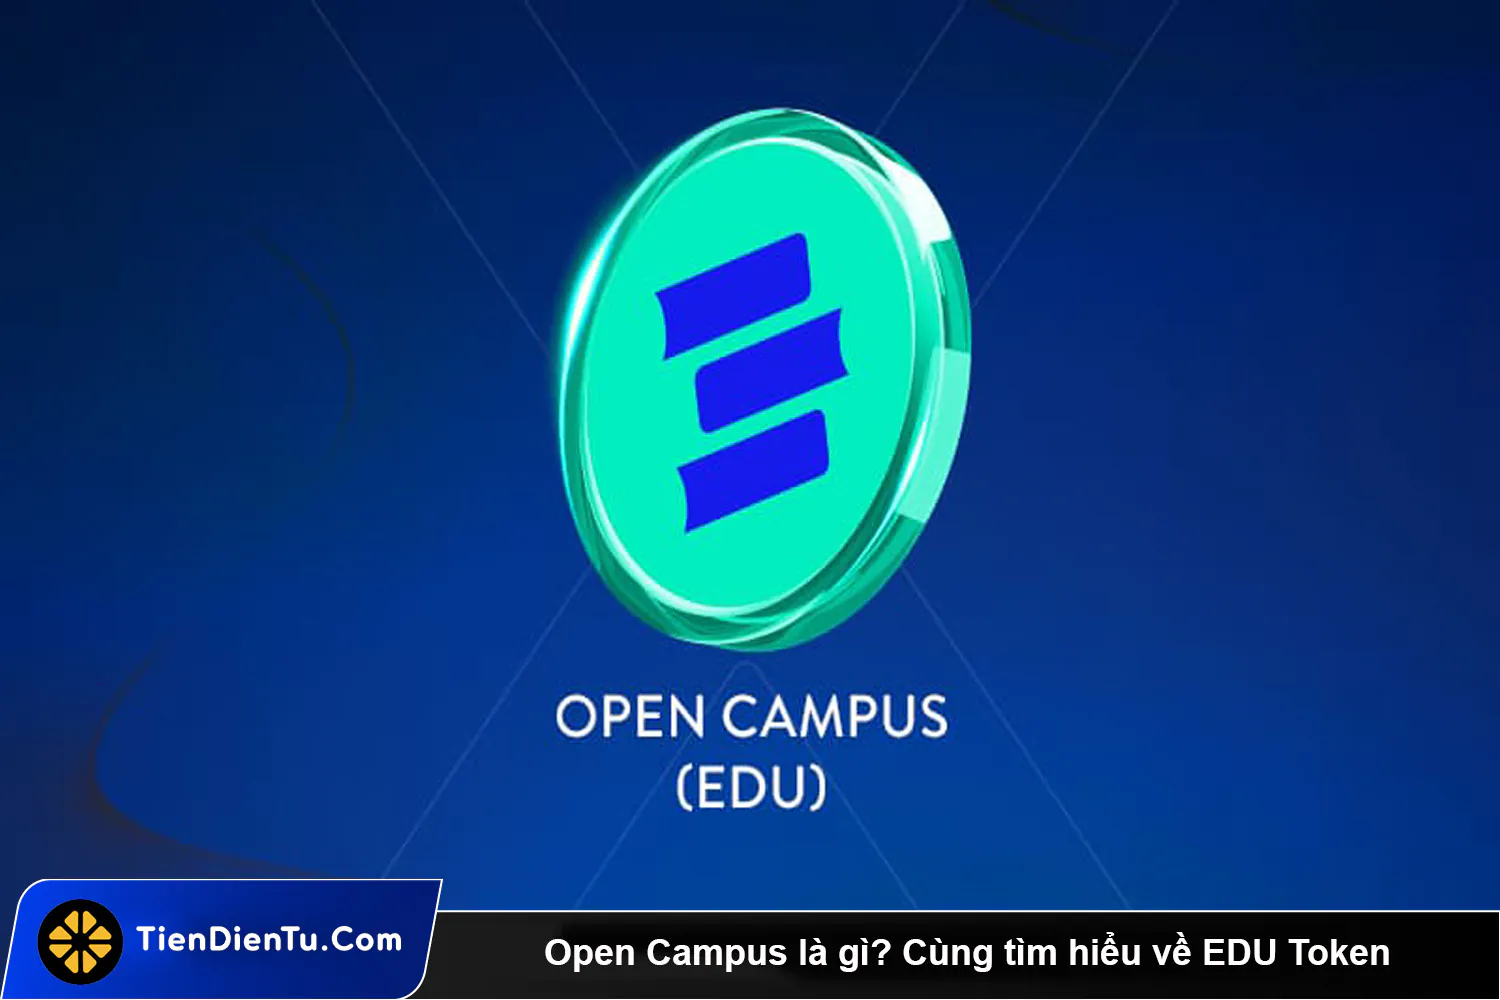 What is Open Campus Information about EDU Token tdt